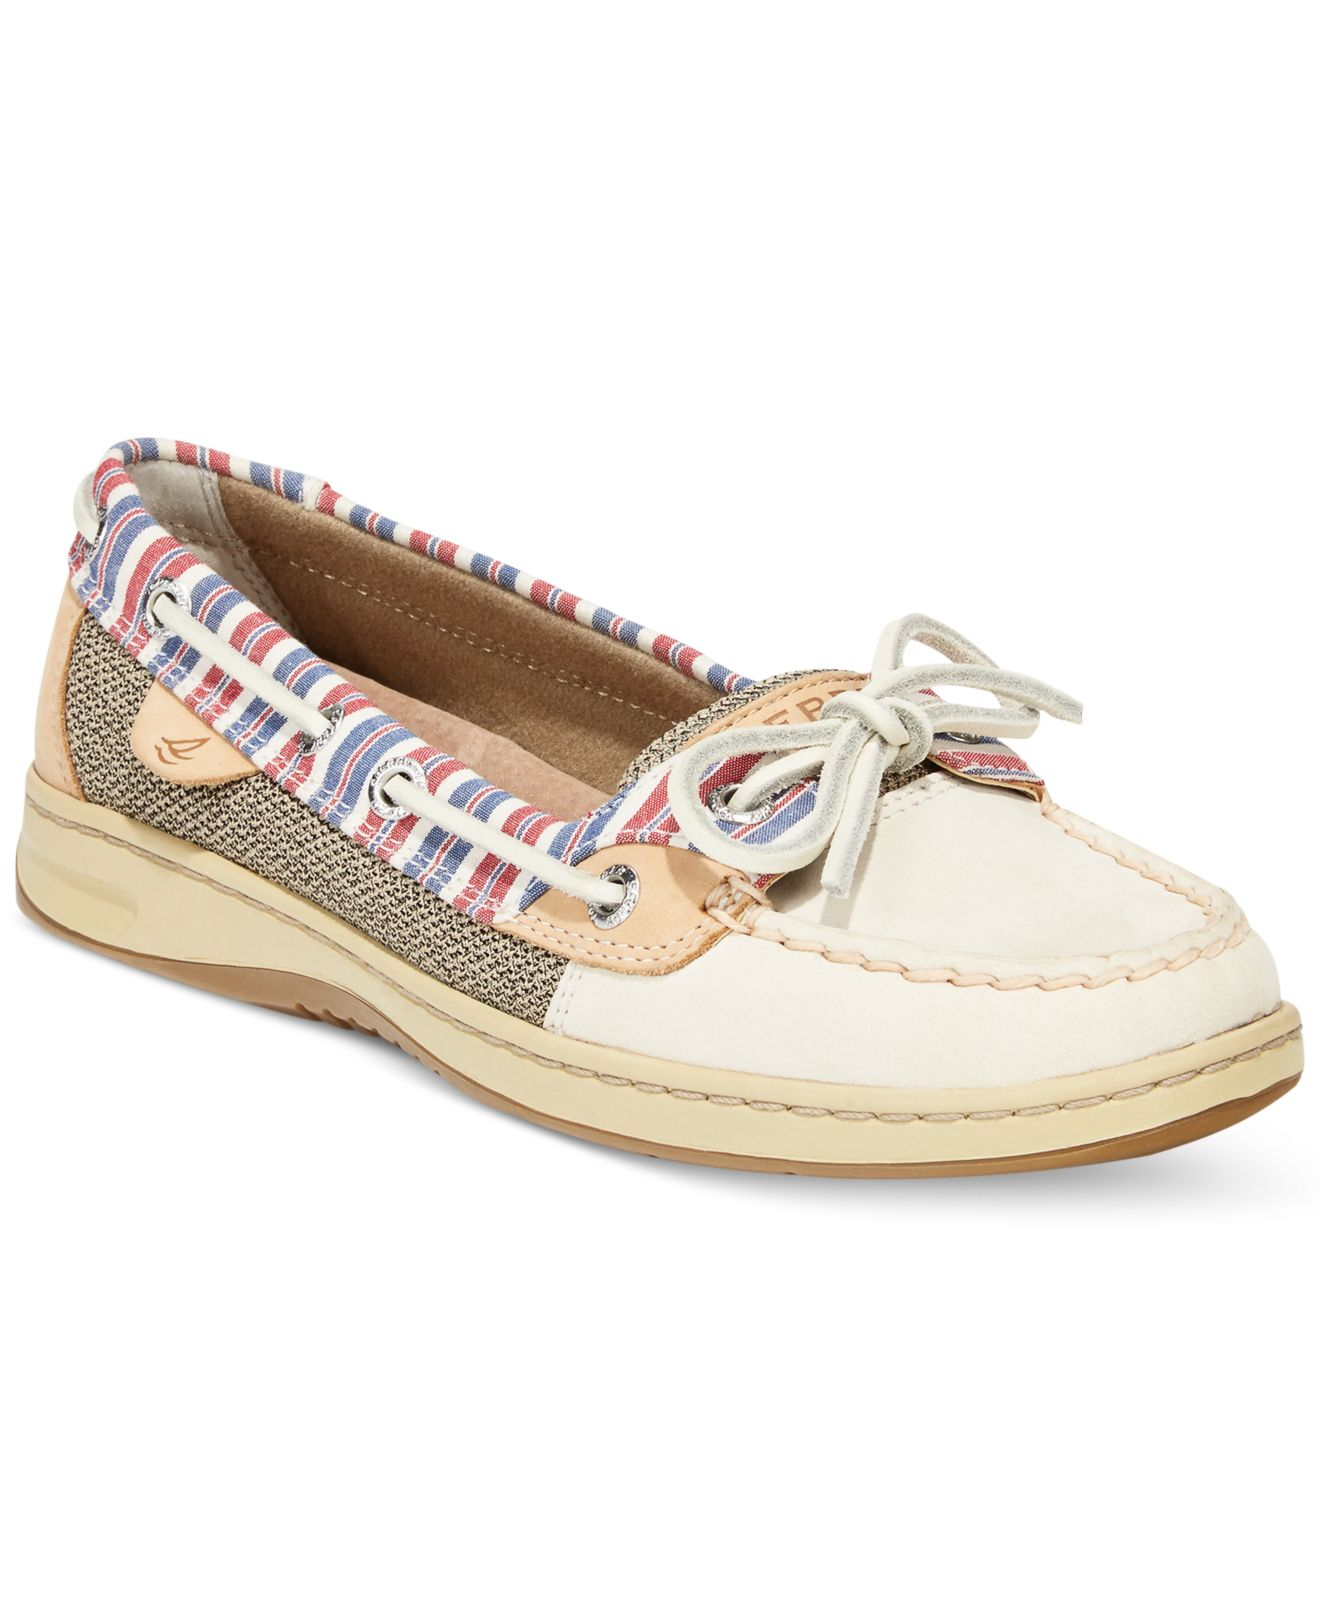 Sperry top-sider Sperry Women'S Angelfish Ribbon Stripe Boat Shoes in ...